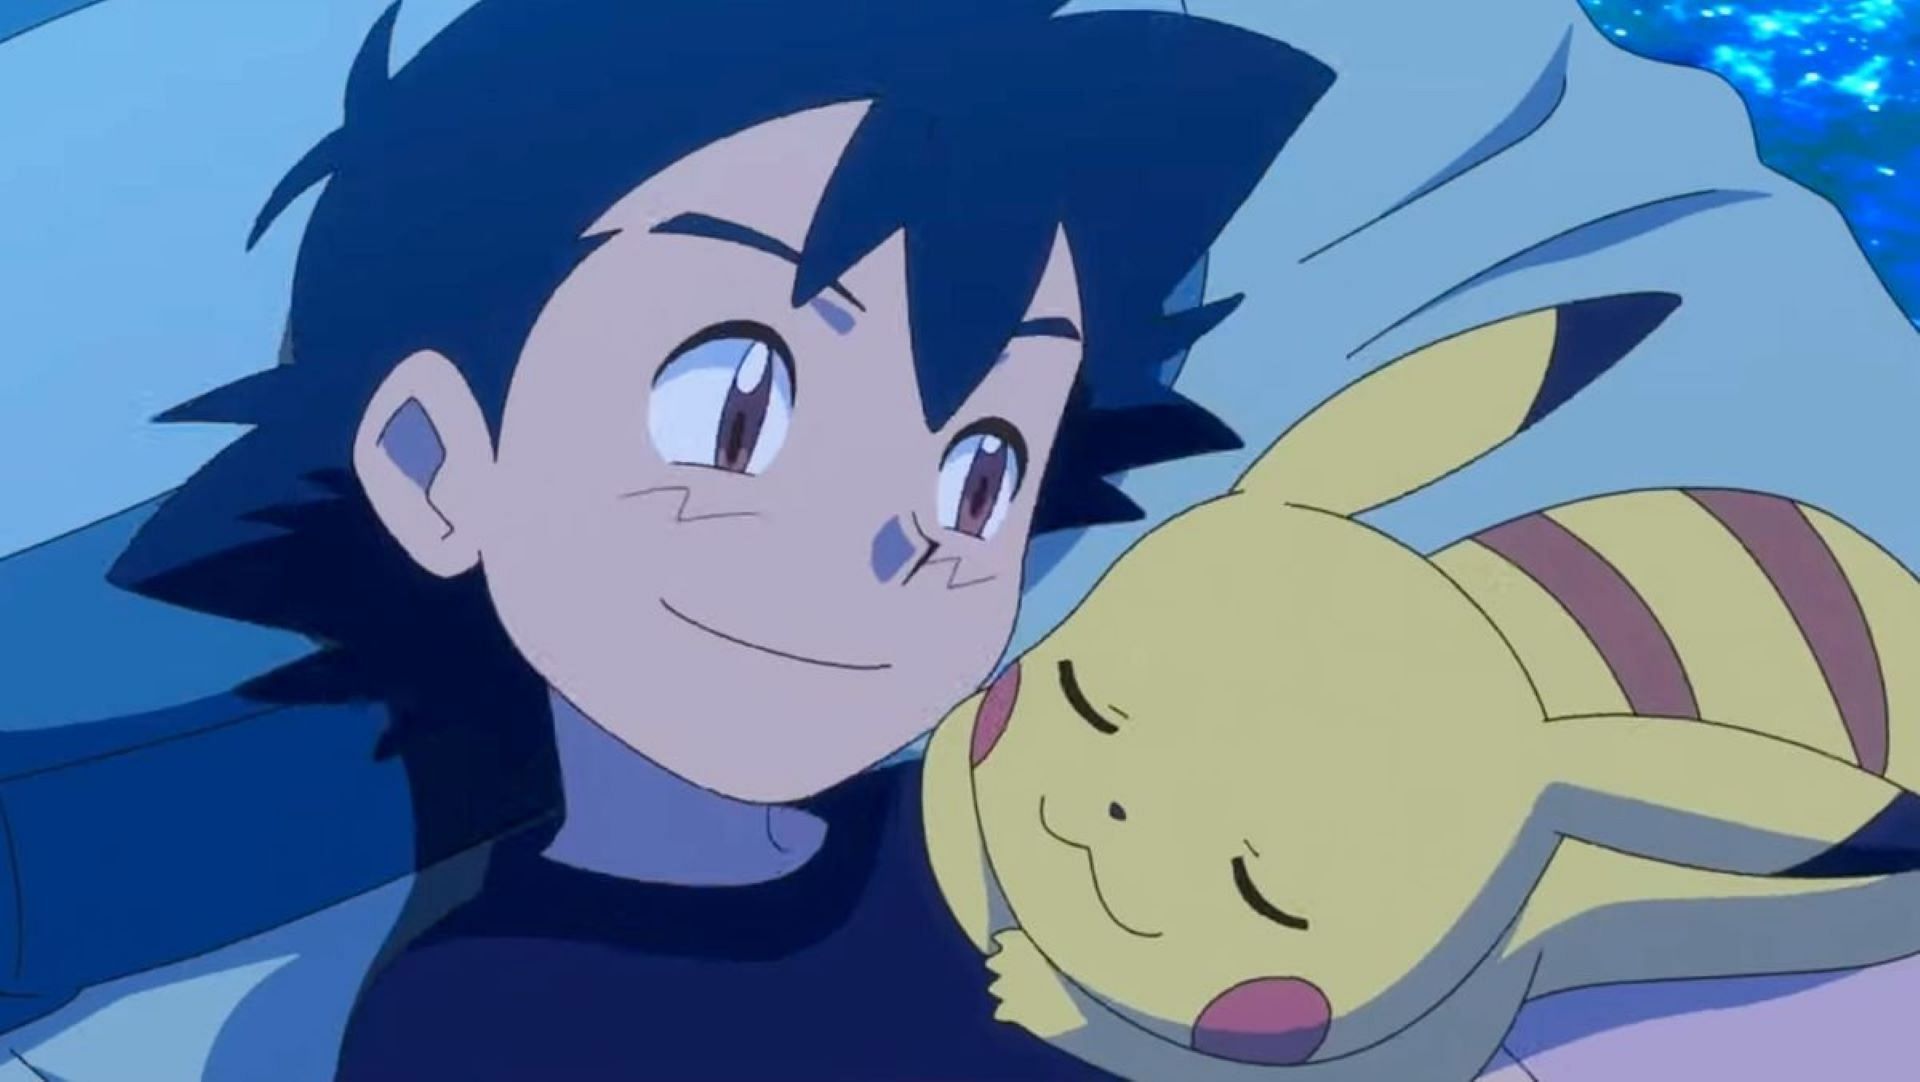 Ash and Pikachu, as seen in the anime (Image via Studio OLM)